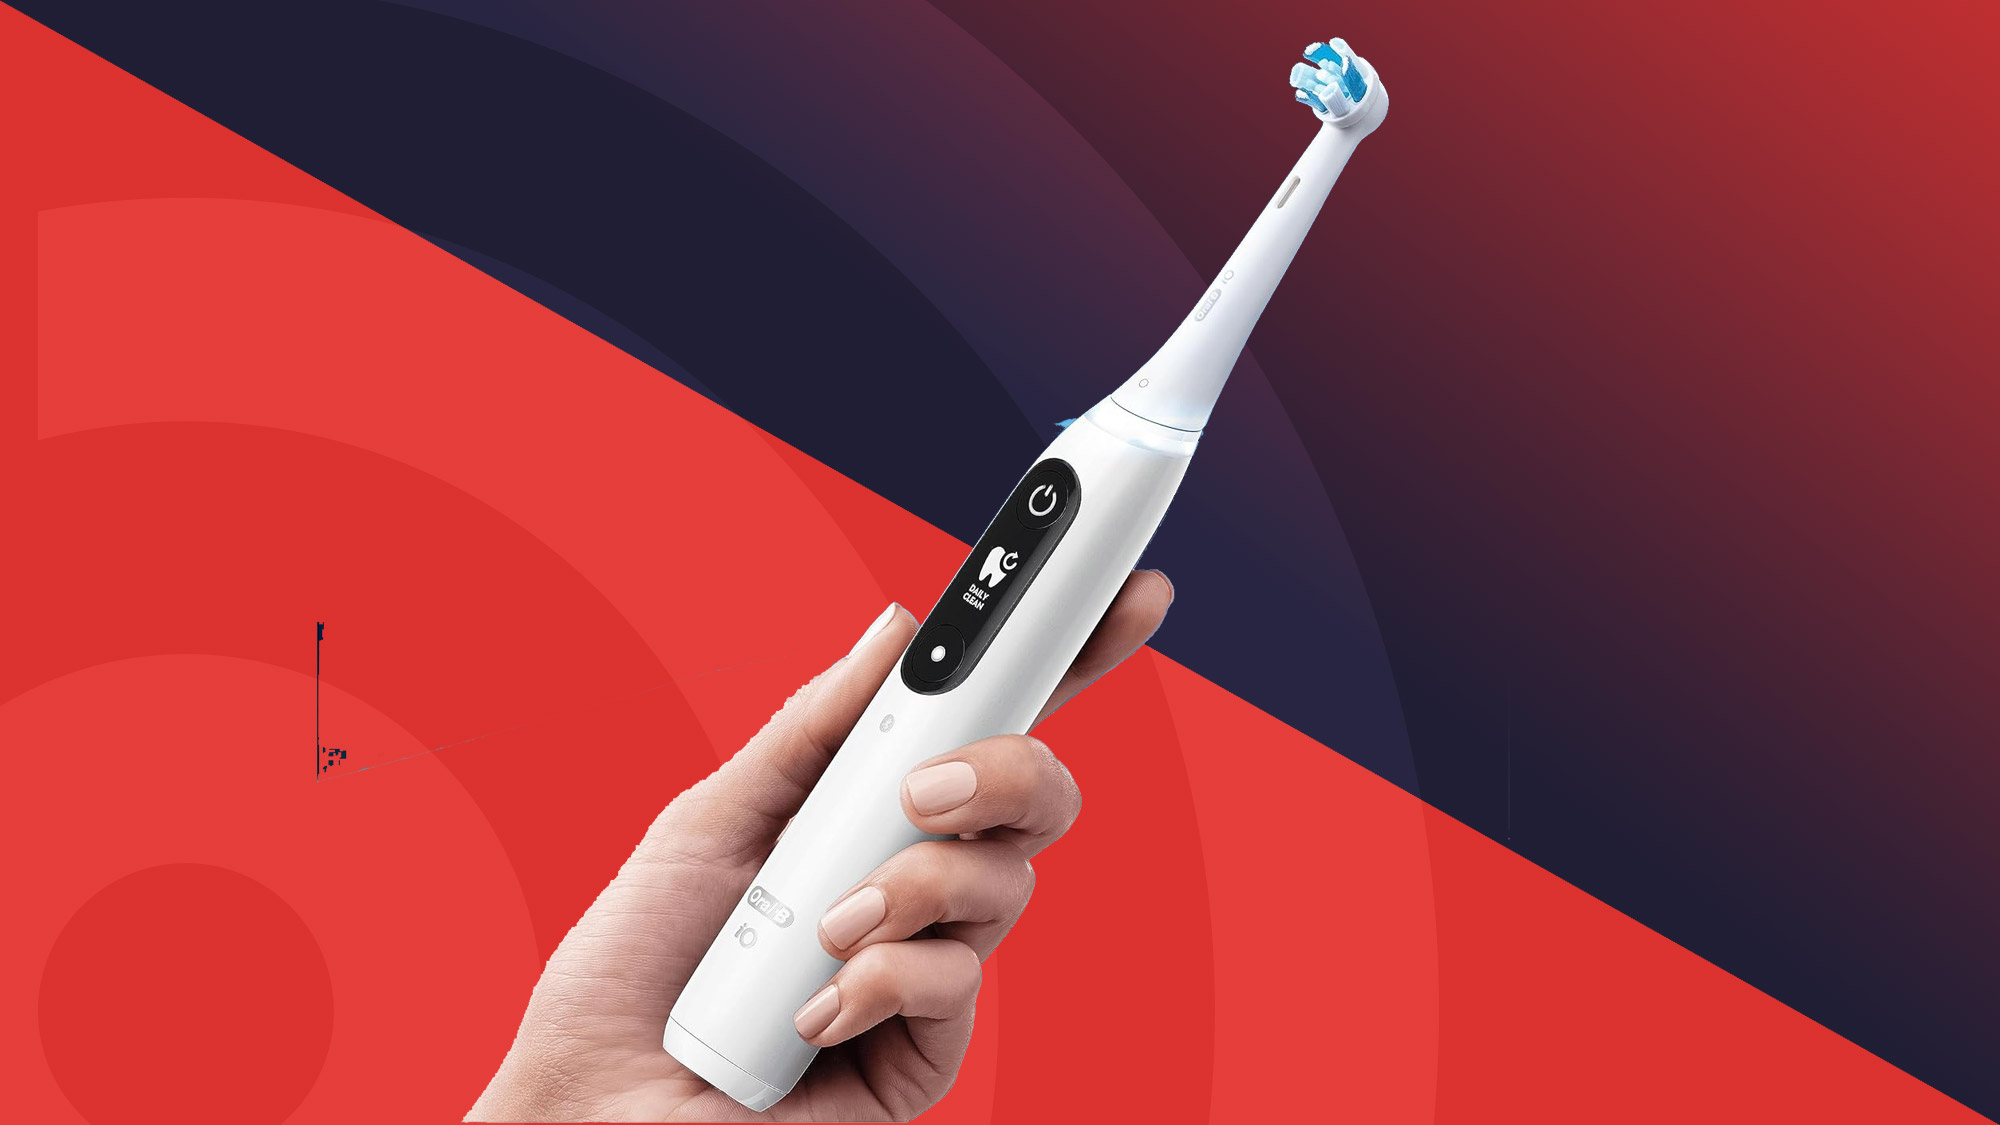 iO Series 9 Rechargeable Electric Toothbrush w/ Bluetooth